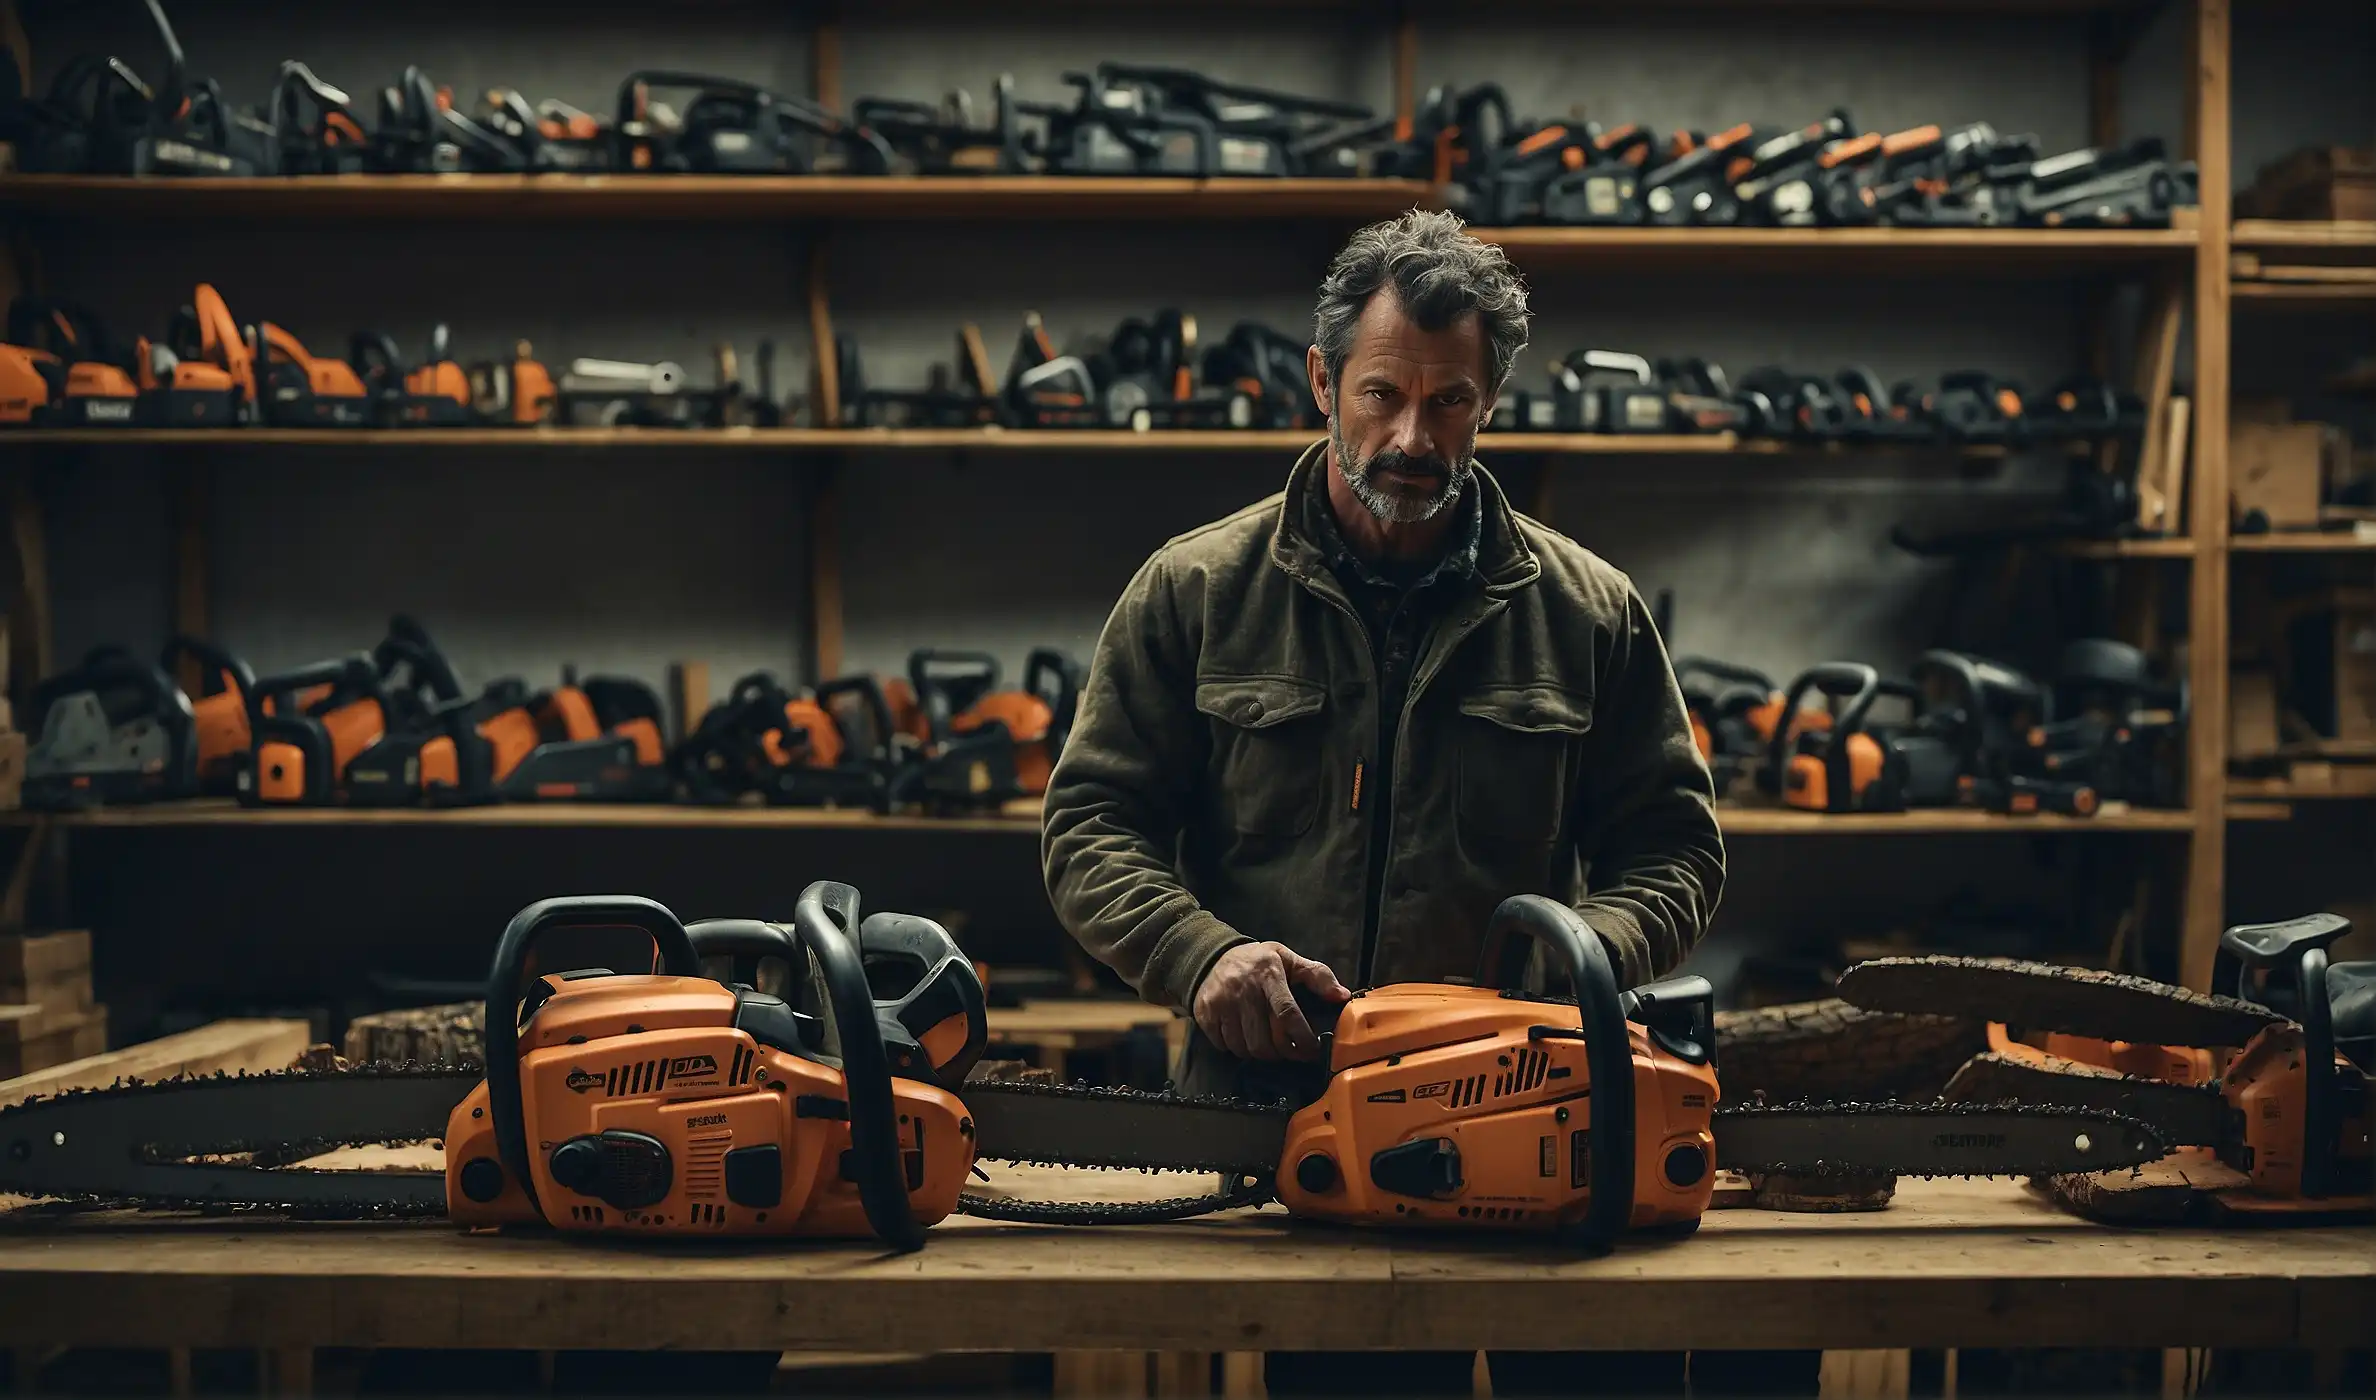 The ideal chainsaw size